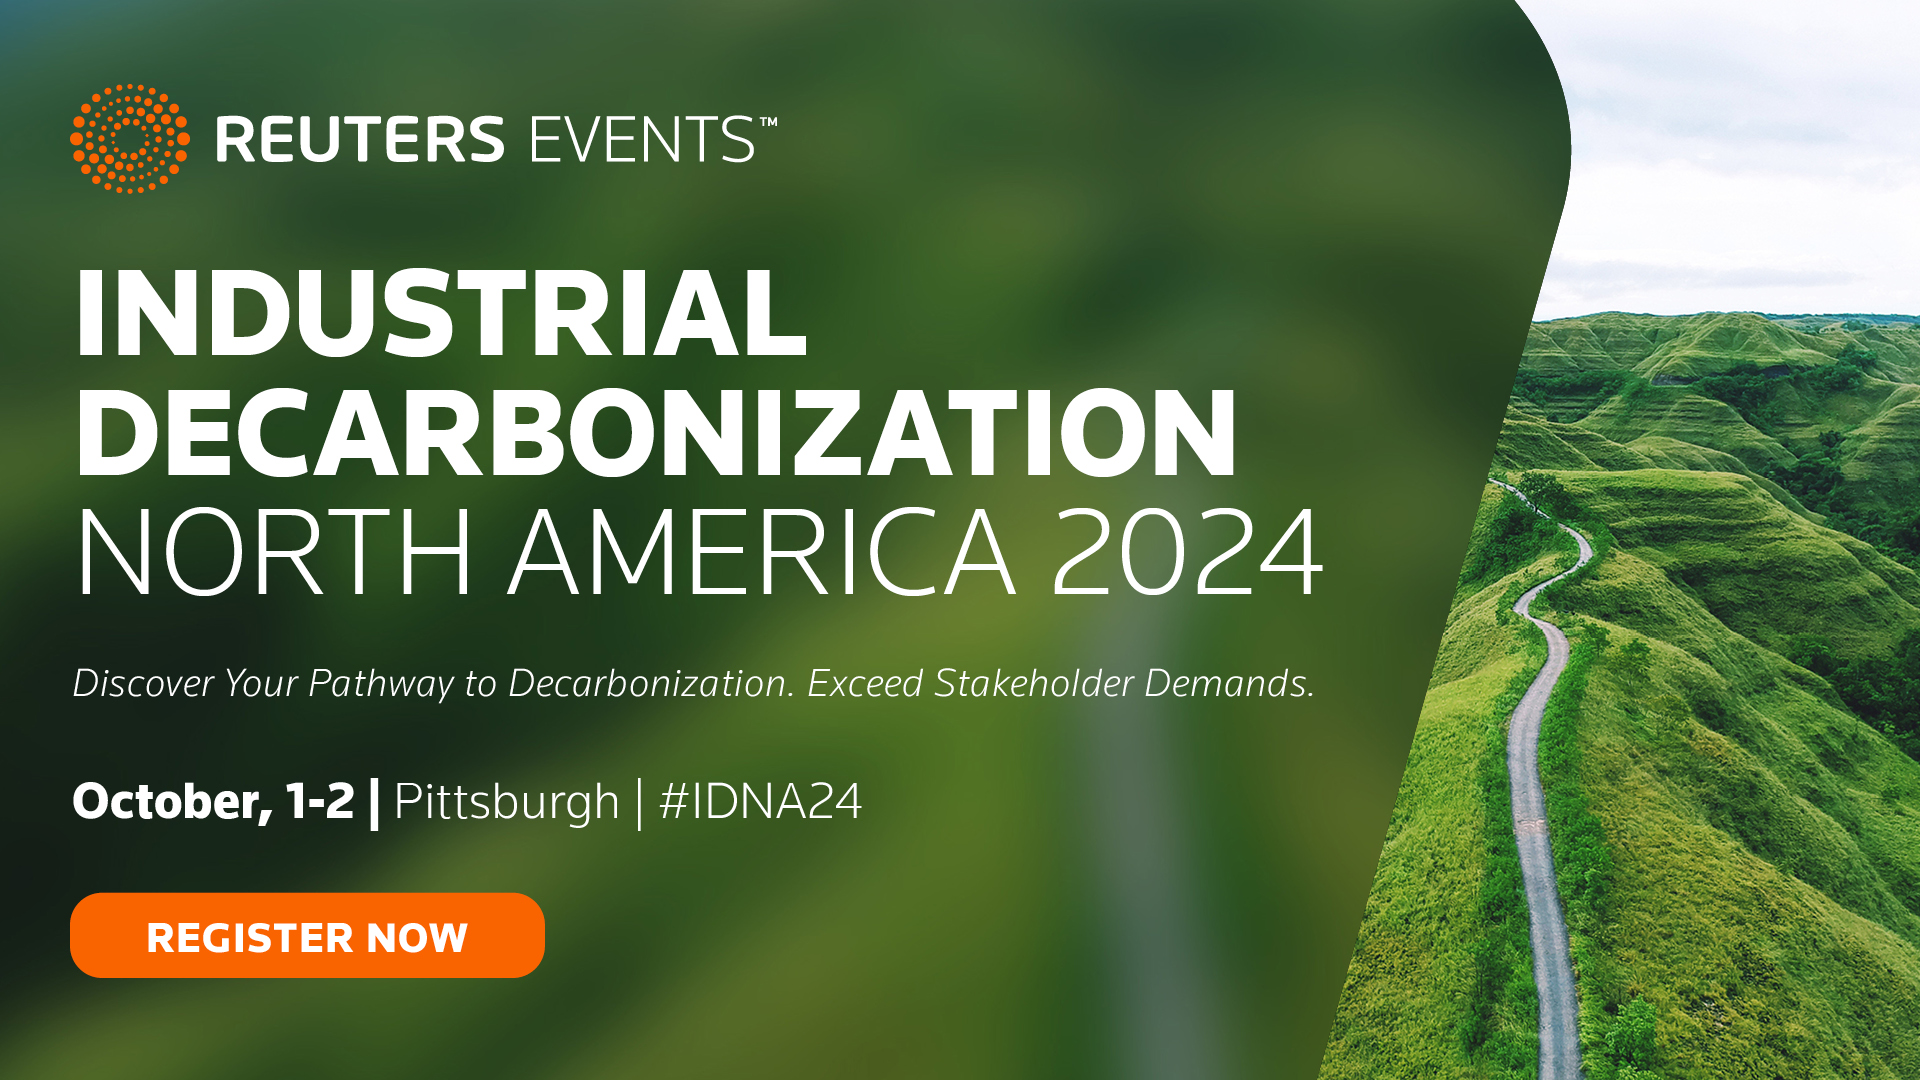 industrial decarbonization 2024 pittsburgh by reuters